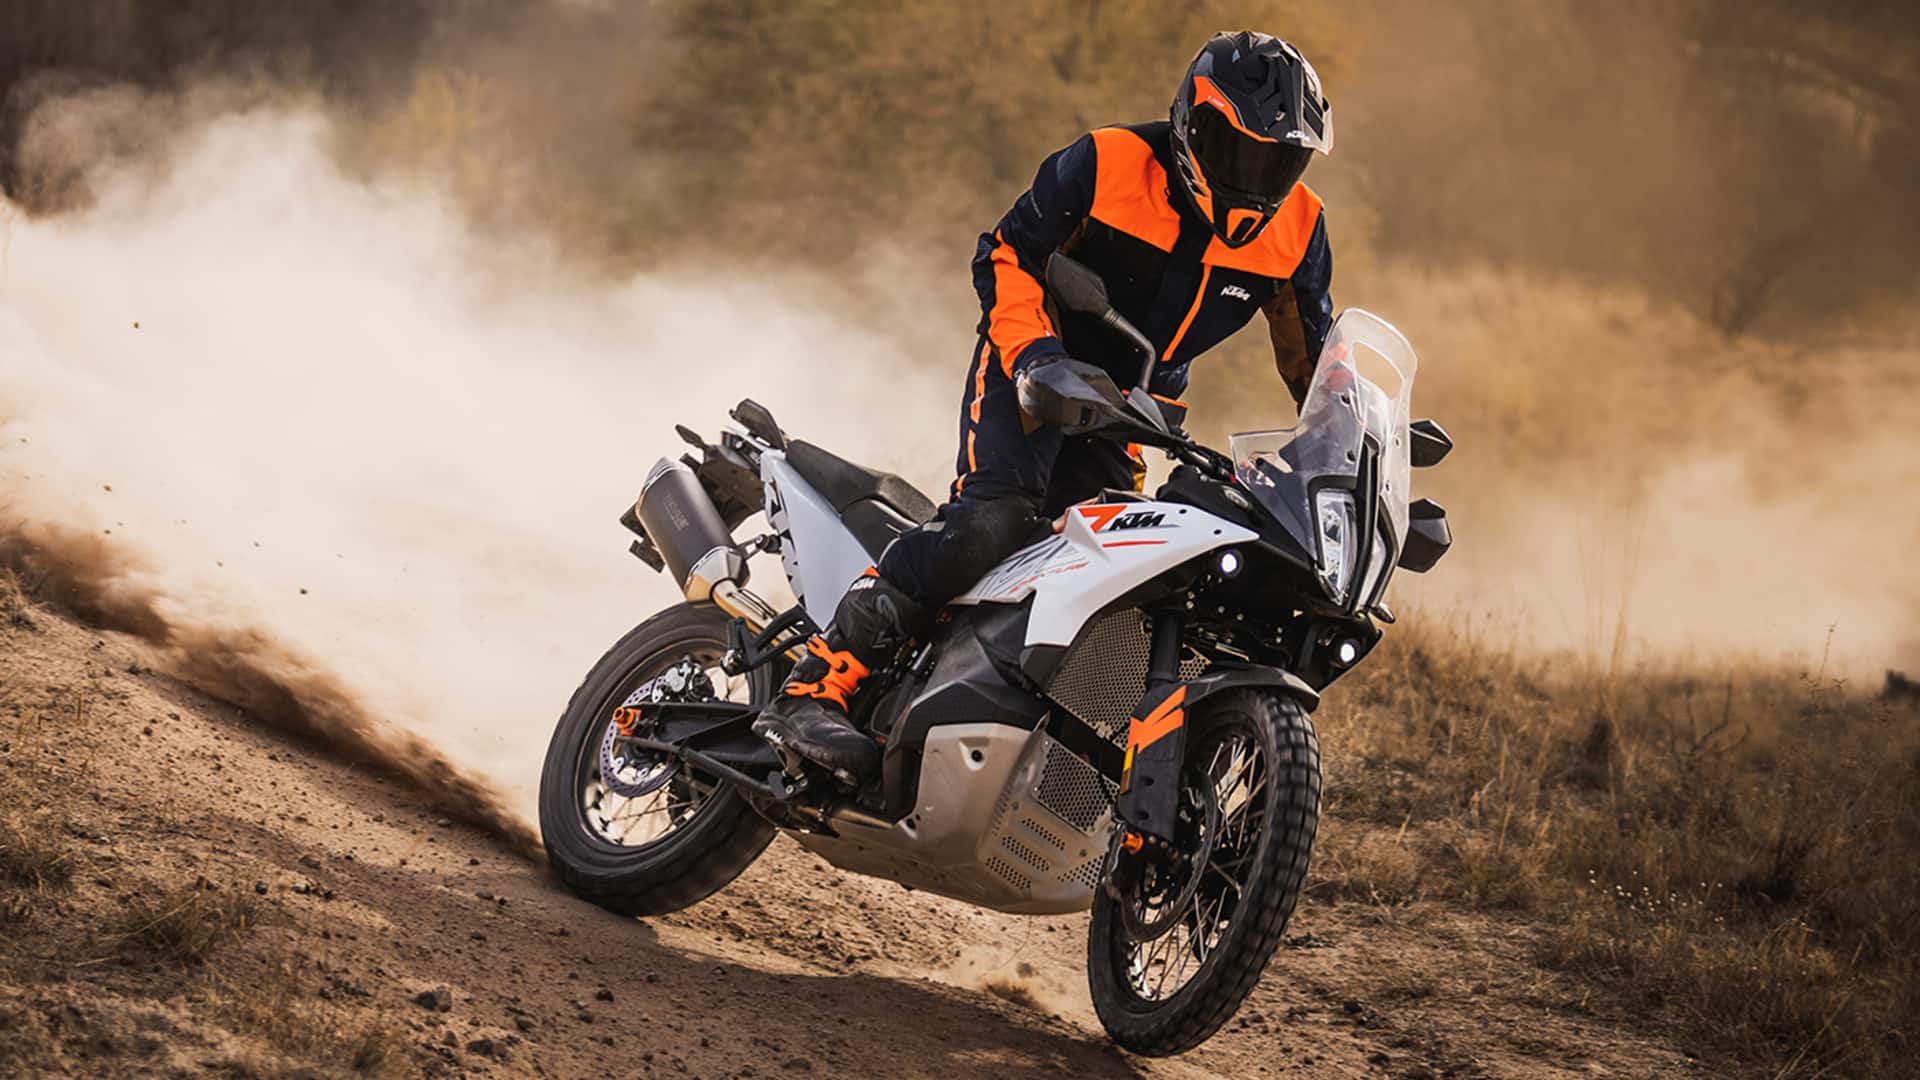 2023 KTM 790 Adventure unveiled with revised styling: Check features